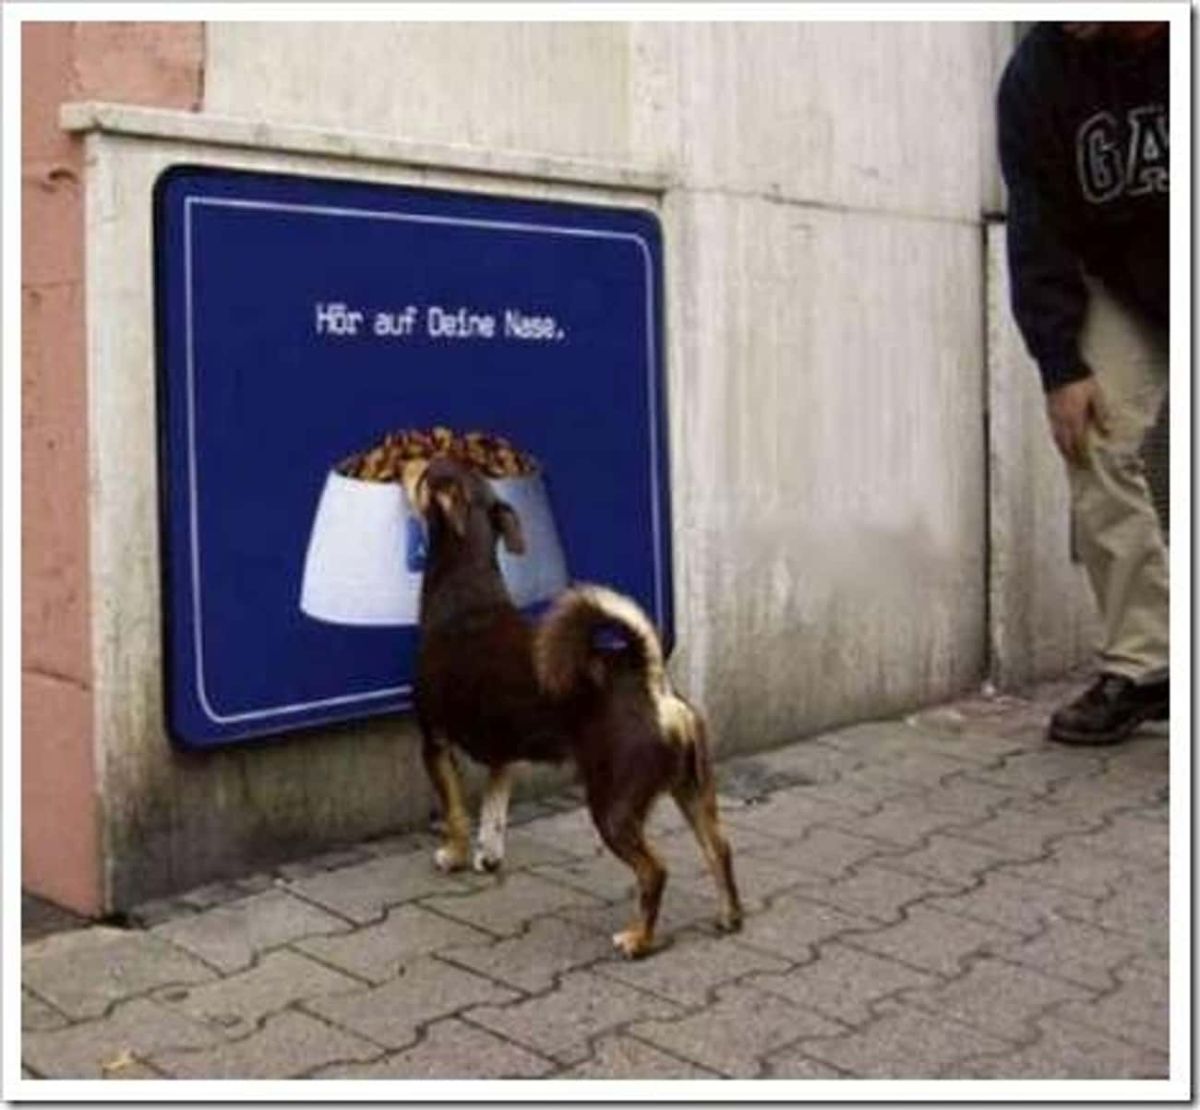 brown dog trying to eat a bowl of dog food on a blue poster on a white wall